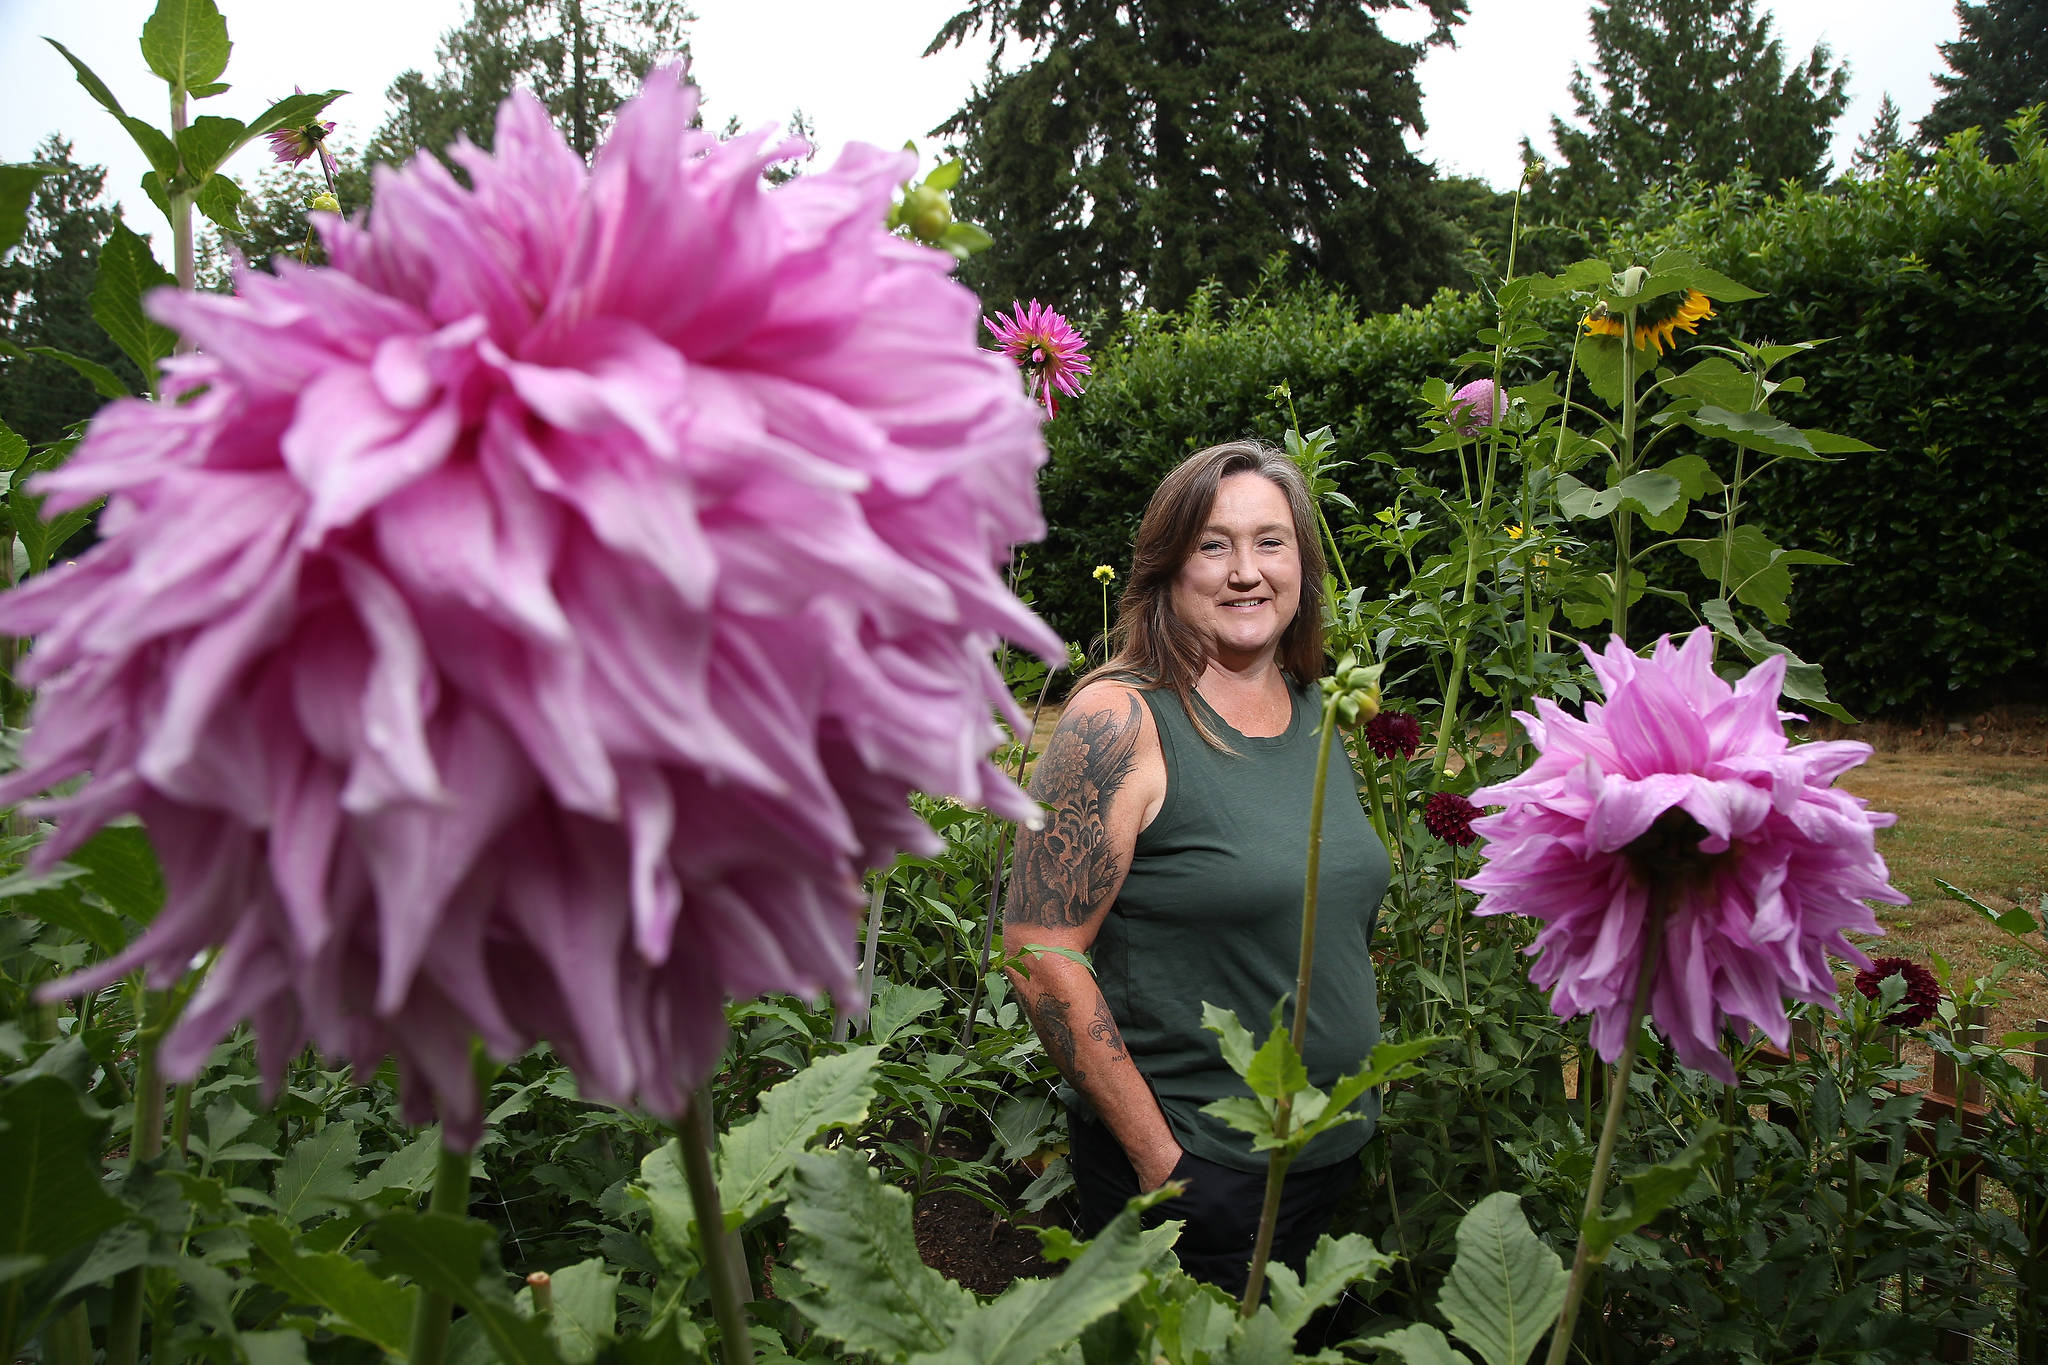 Arlington resident Lisa Welty, of the Snohomish County Dahlia Society, stands in her dahlia garden with two “Penn’s Gift” dahlias. She will be showing her flowers at the society’s annual show at Forest Park in Everett. (Andy Bronson / The Herald)